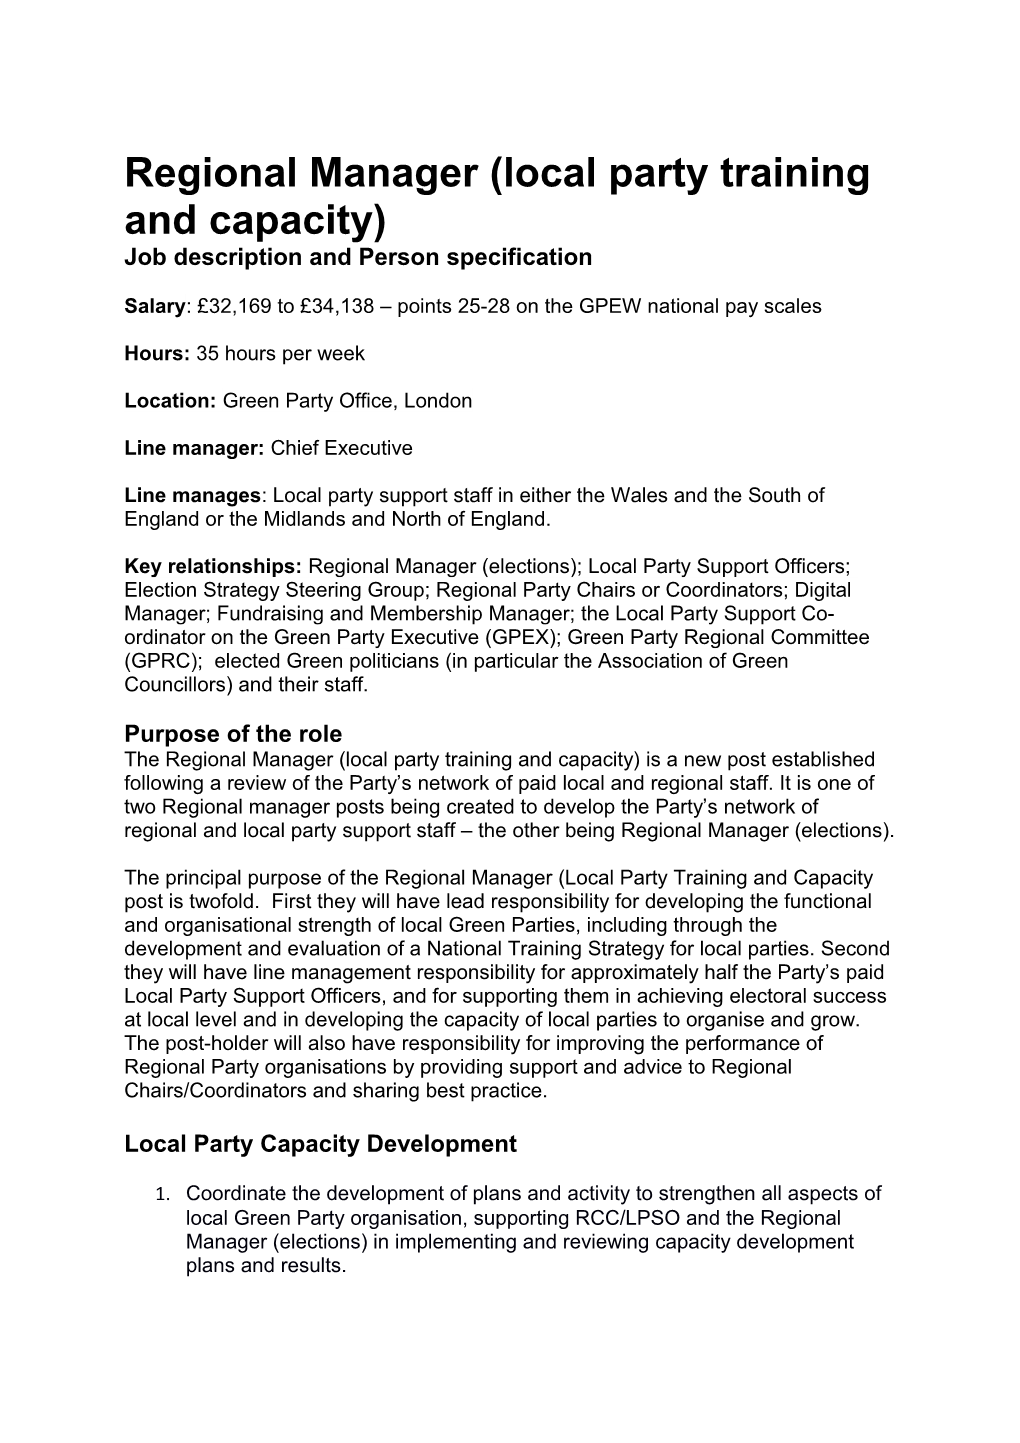 Regional Manager (Local Party Training and Capacity)